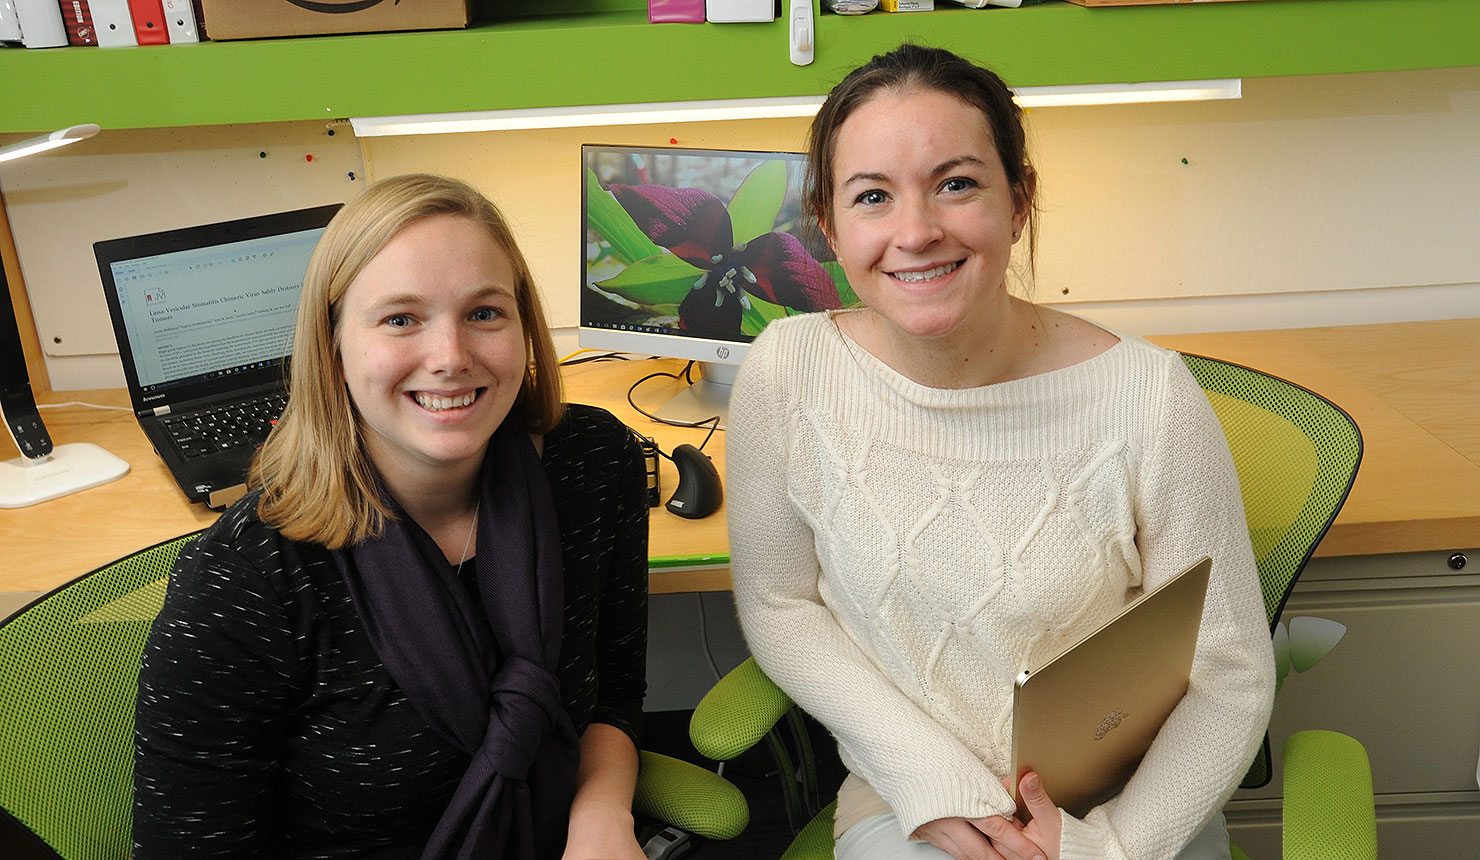 Heidi Chapman (left) and Riley Hampsch, both PhD candidates at Geisel, are recipients of 2017 Dartmouth SYNERGY/Celdara Medical High-Potential Entrepreneurs' Fellowships. (Photo by Jon Gilbert Fox)